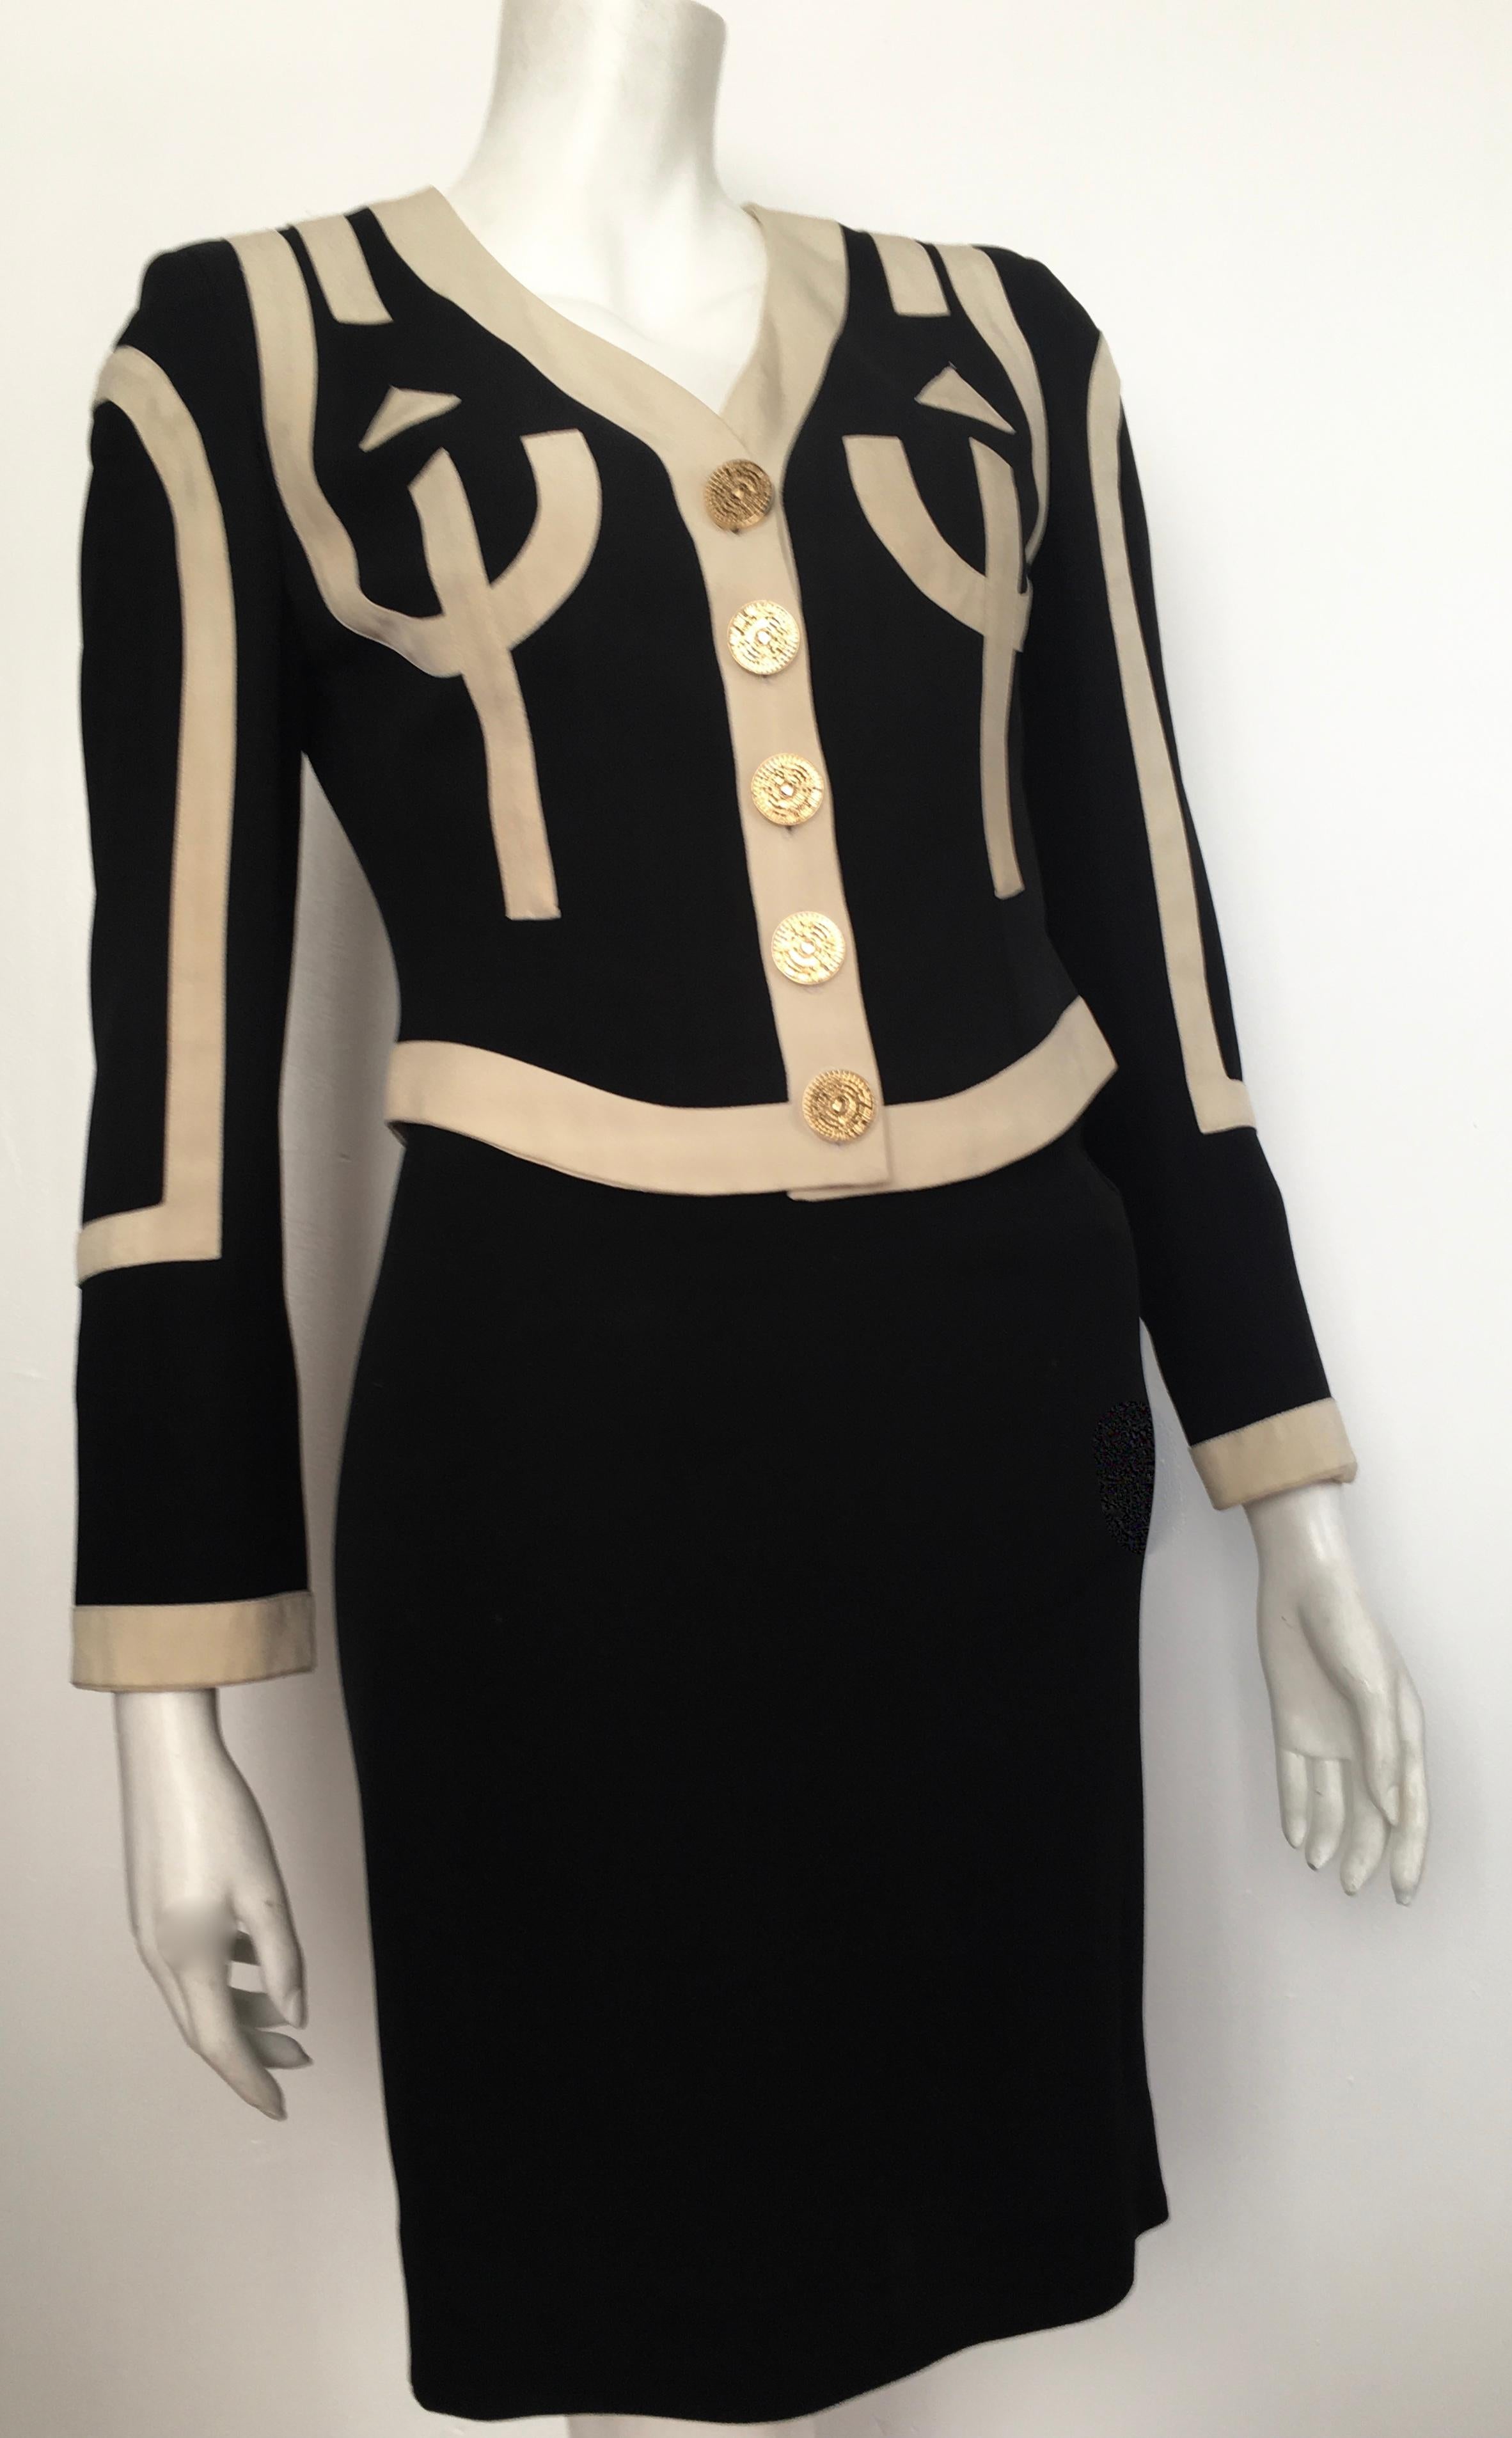 Moschino Cheap & Chic 1990s black & cream jacket & skirt suit made in Italy. The jacket is a labeled a size 6 and the skirt is labeled size 4.  The waist on the skirt is 24. 1/2